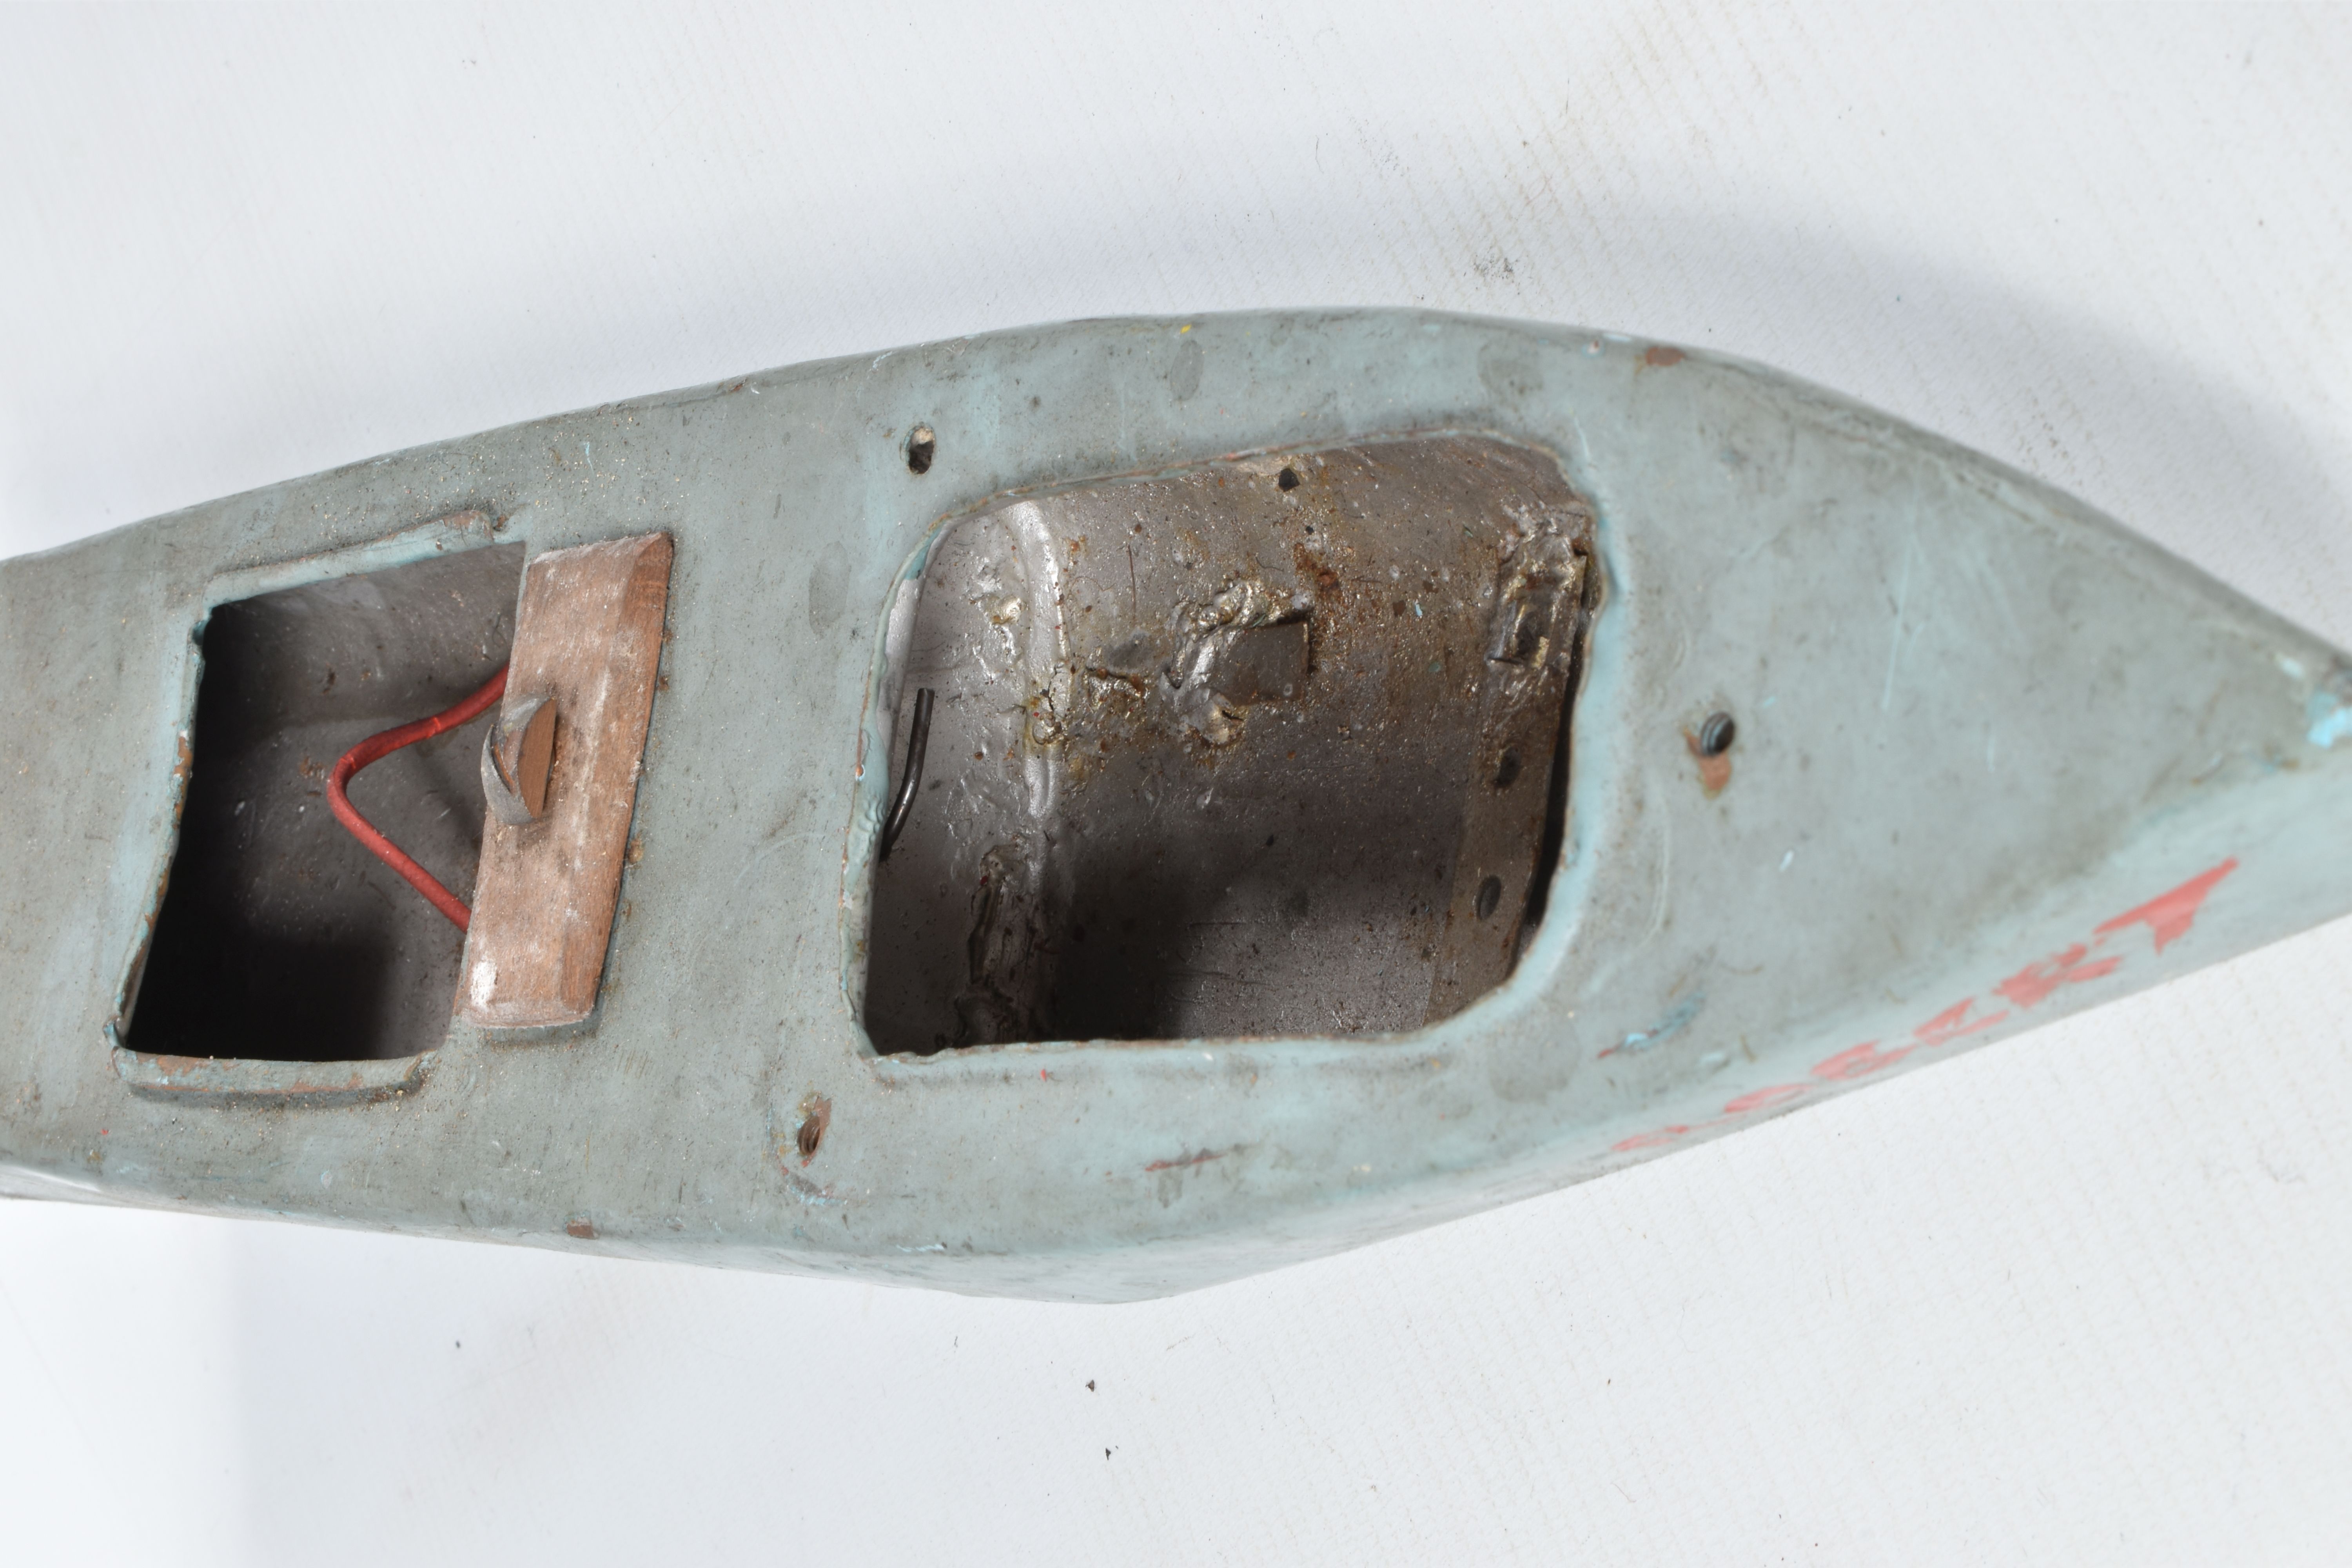 A HORNBY TINPLATE CLOCKWORK SPEED BOAT 'Venture', No.4, not tested, no key, blue hull with white - Image 5 of 9